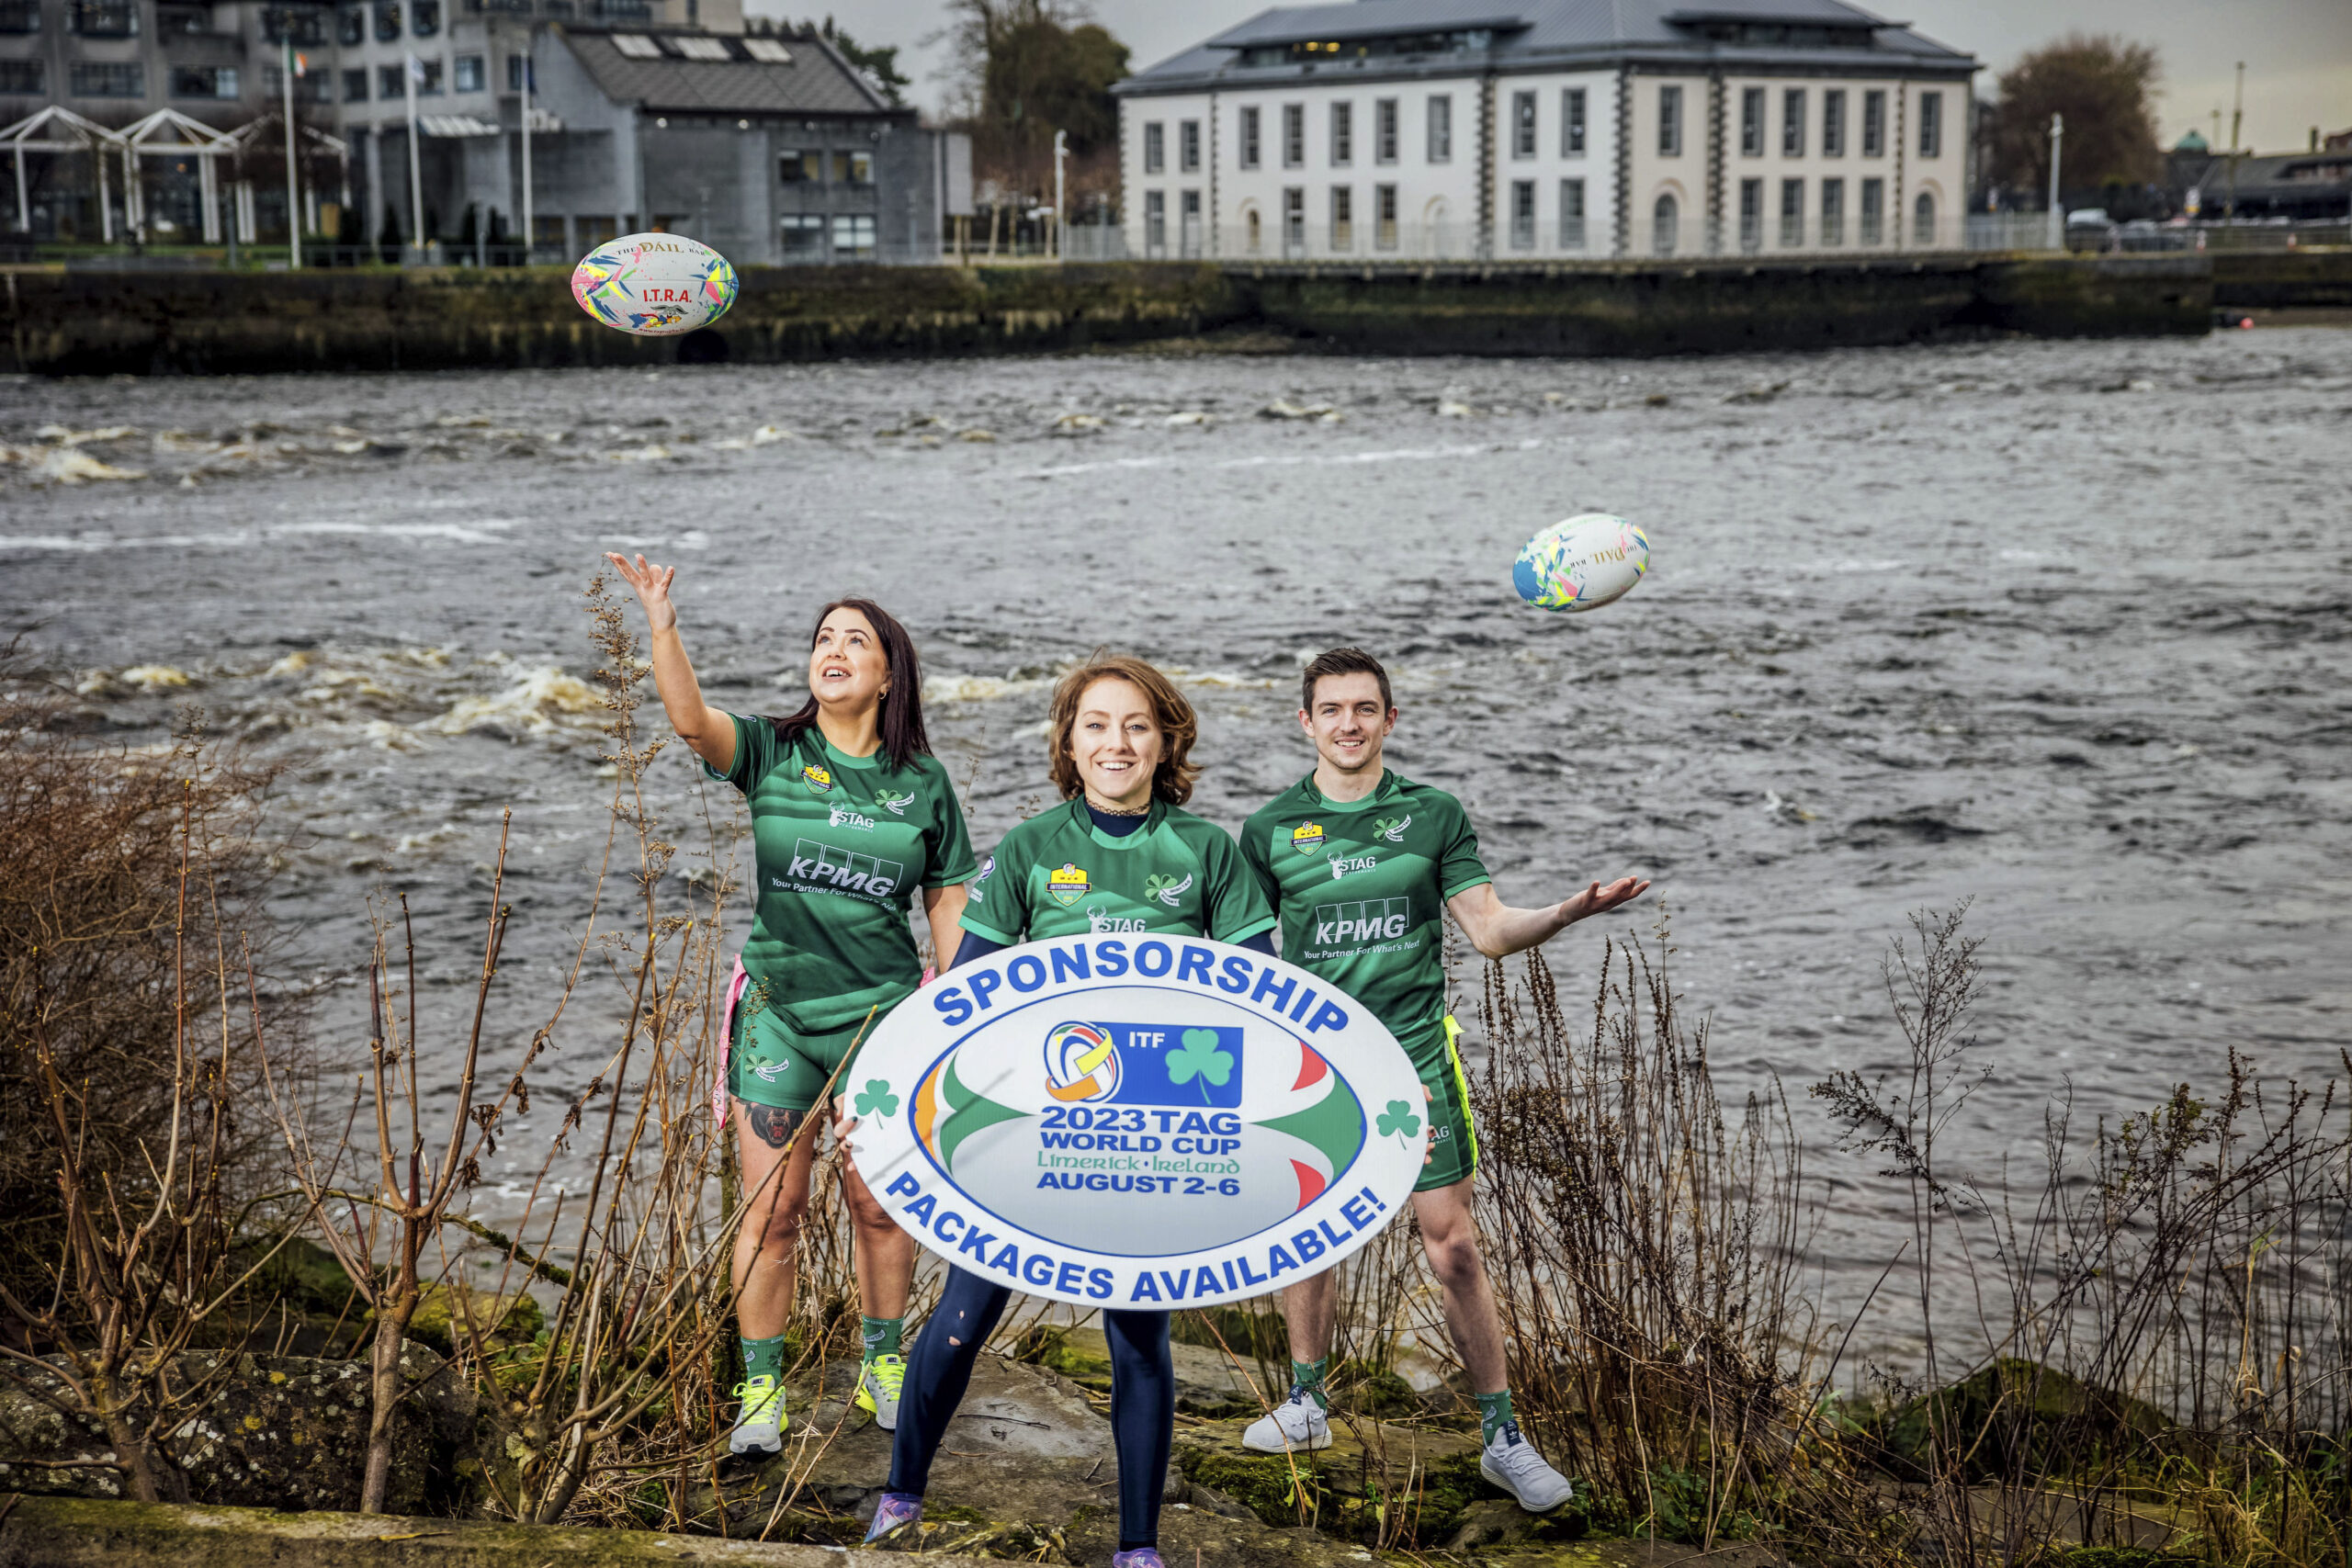 The 2023 Tag World Cup will kick off in Limerick this August following a two-year delay